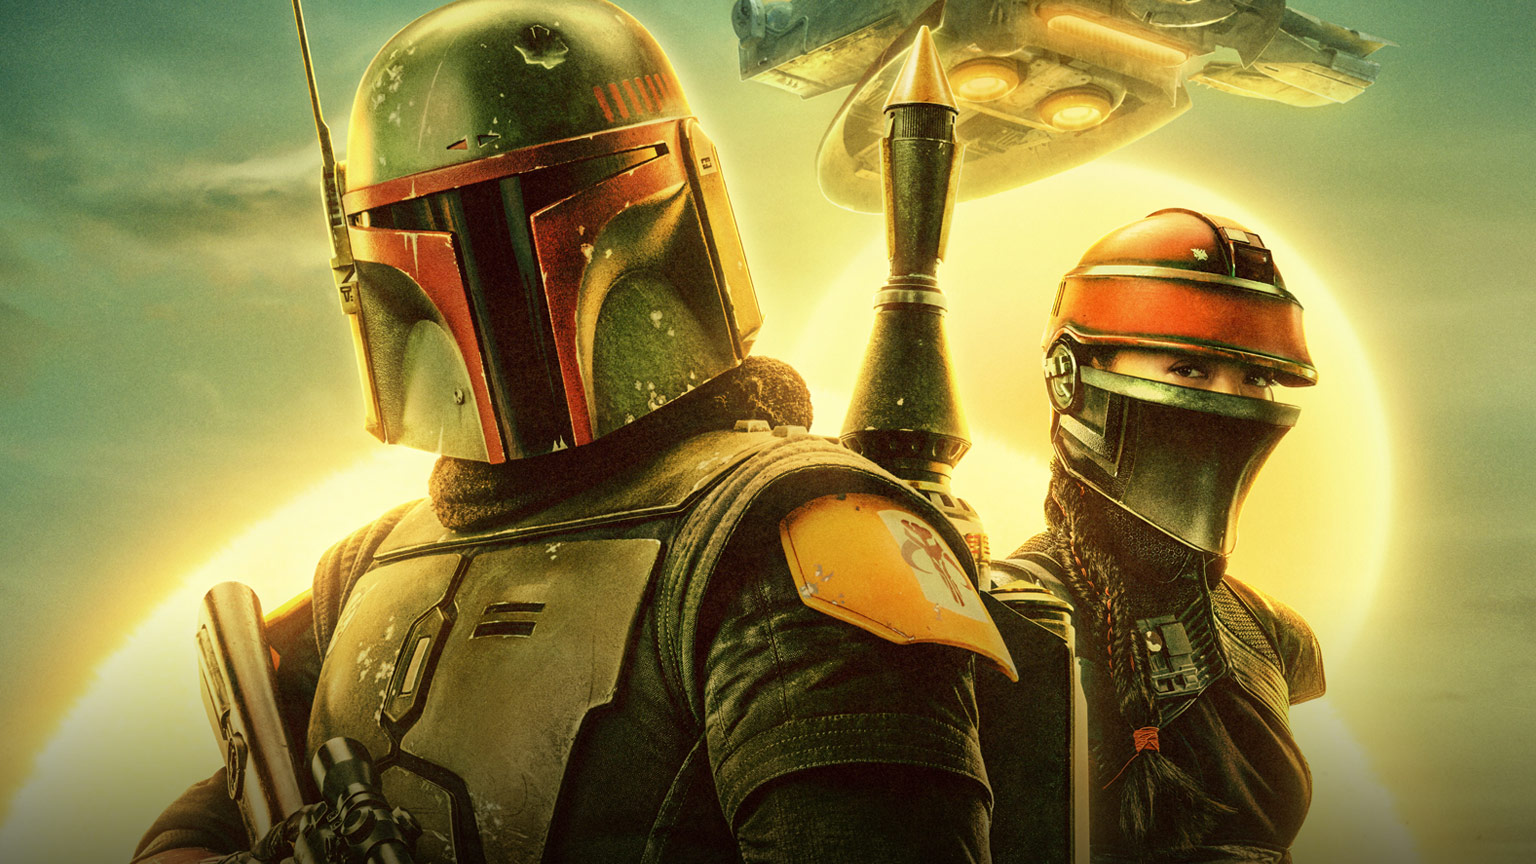 ‘The Book Of Boba Fett’ Trailer Has The Bounty Hunter Attempting To Rule With Respect